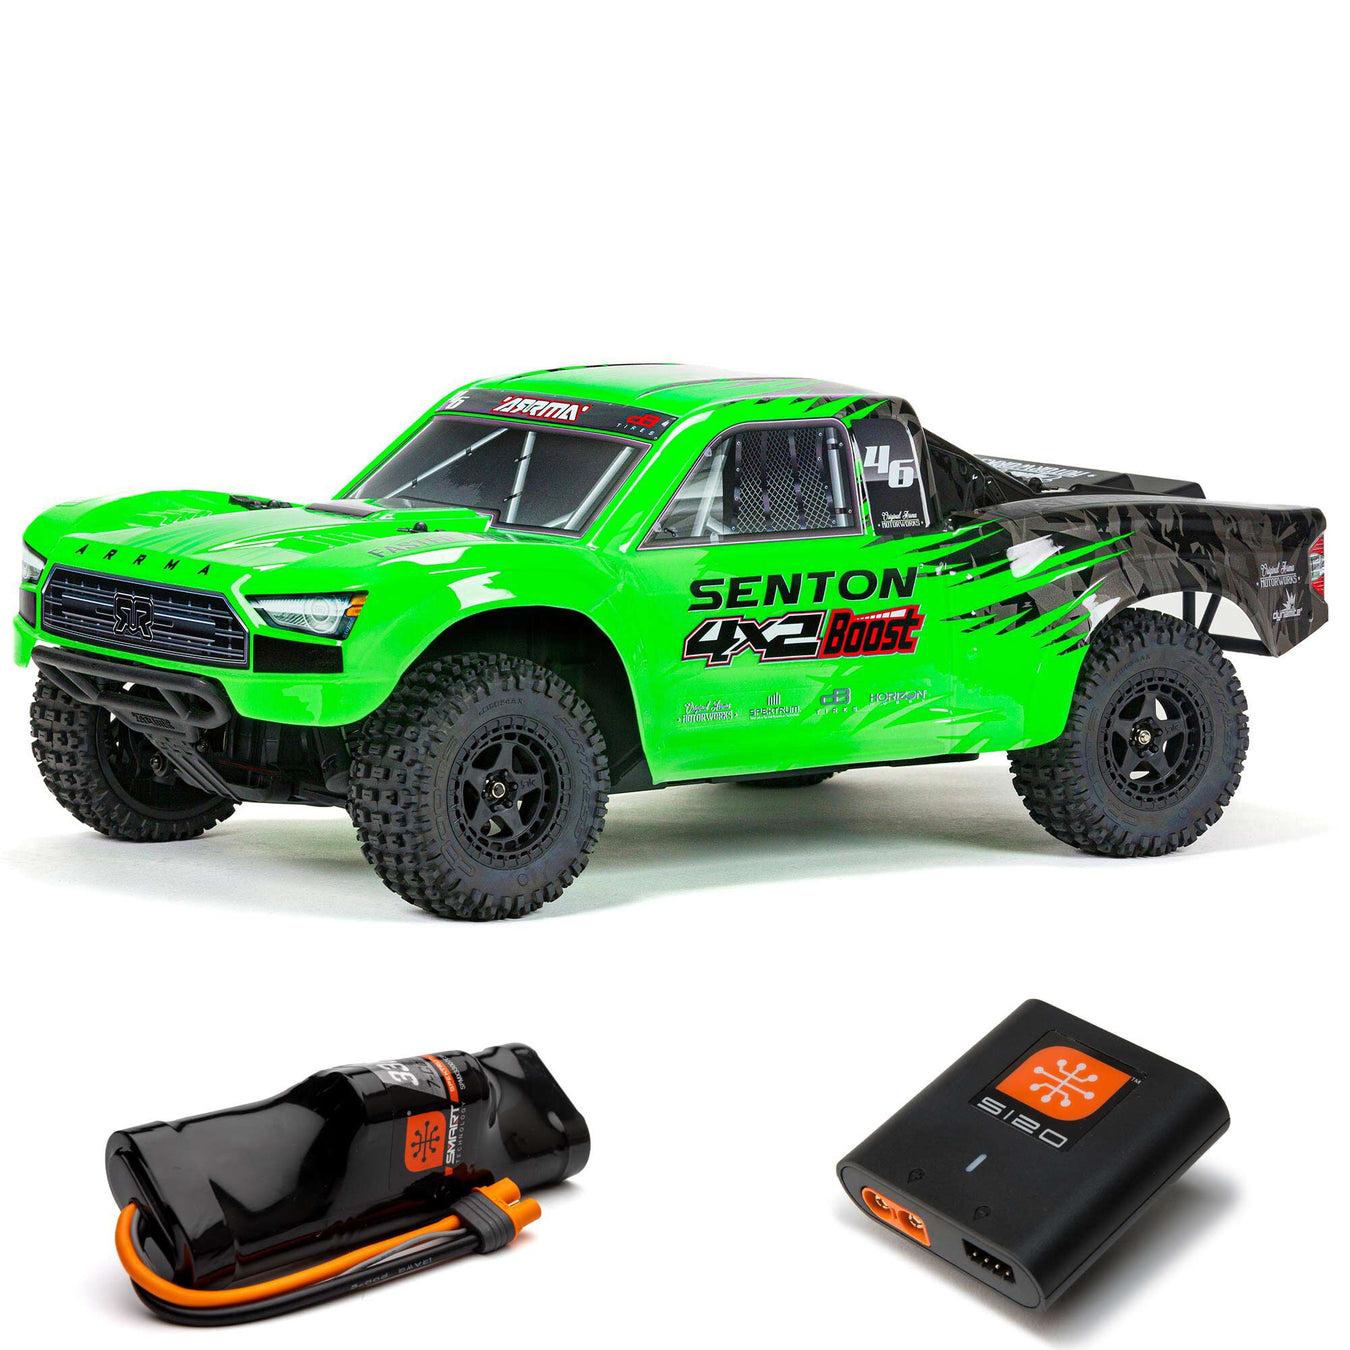 Brand_1RC-Racing, Product_Bodies